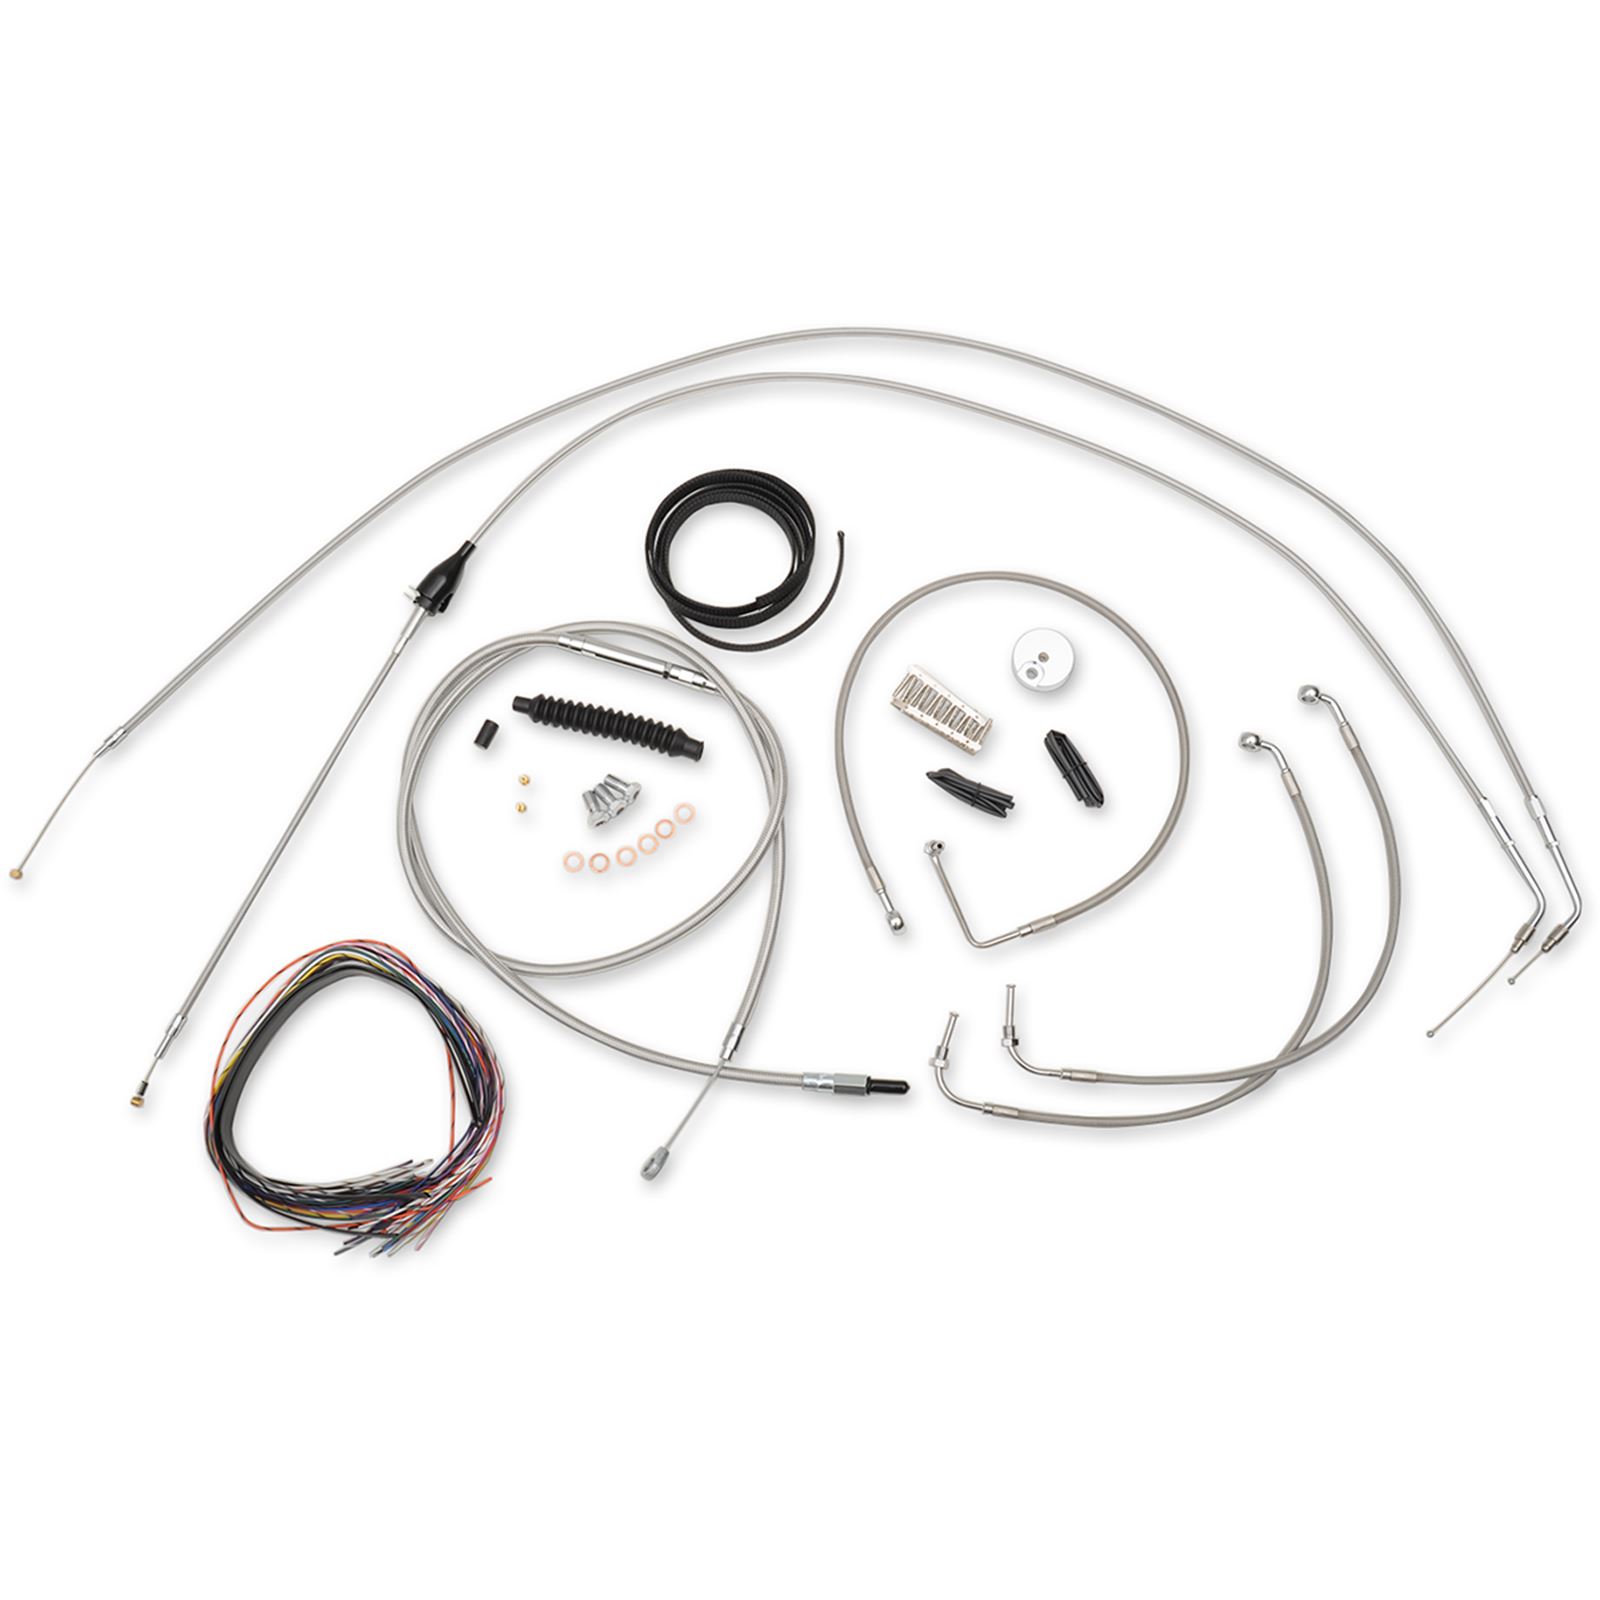 LA Choppers 18" - 20" Cable Kit for '96 - '06 Road King